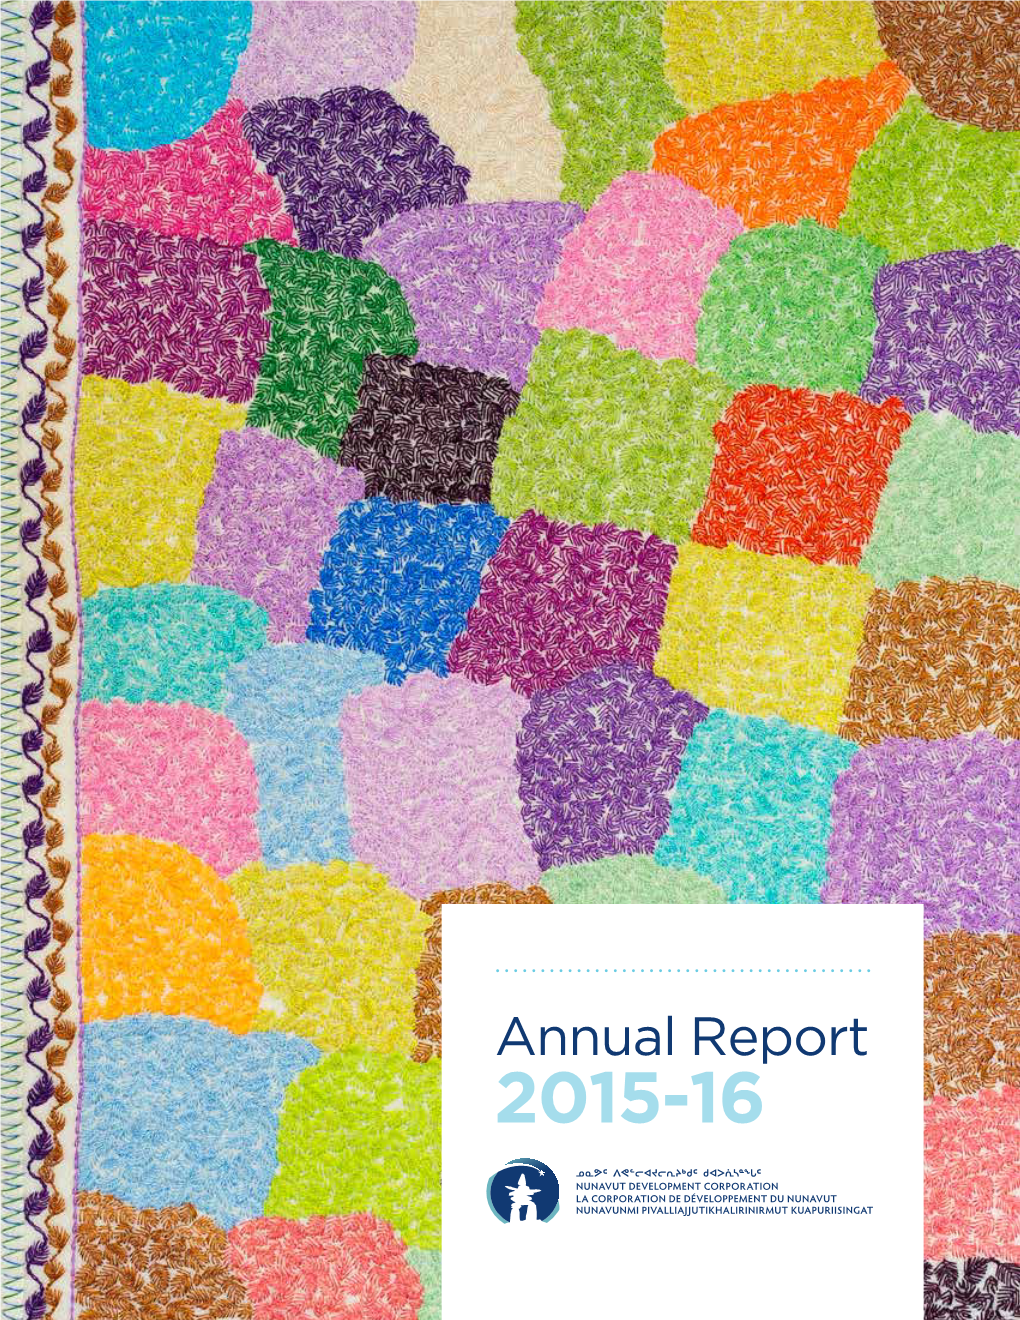 Annual Report 2015-16 Table of Contents